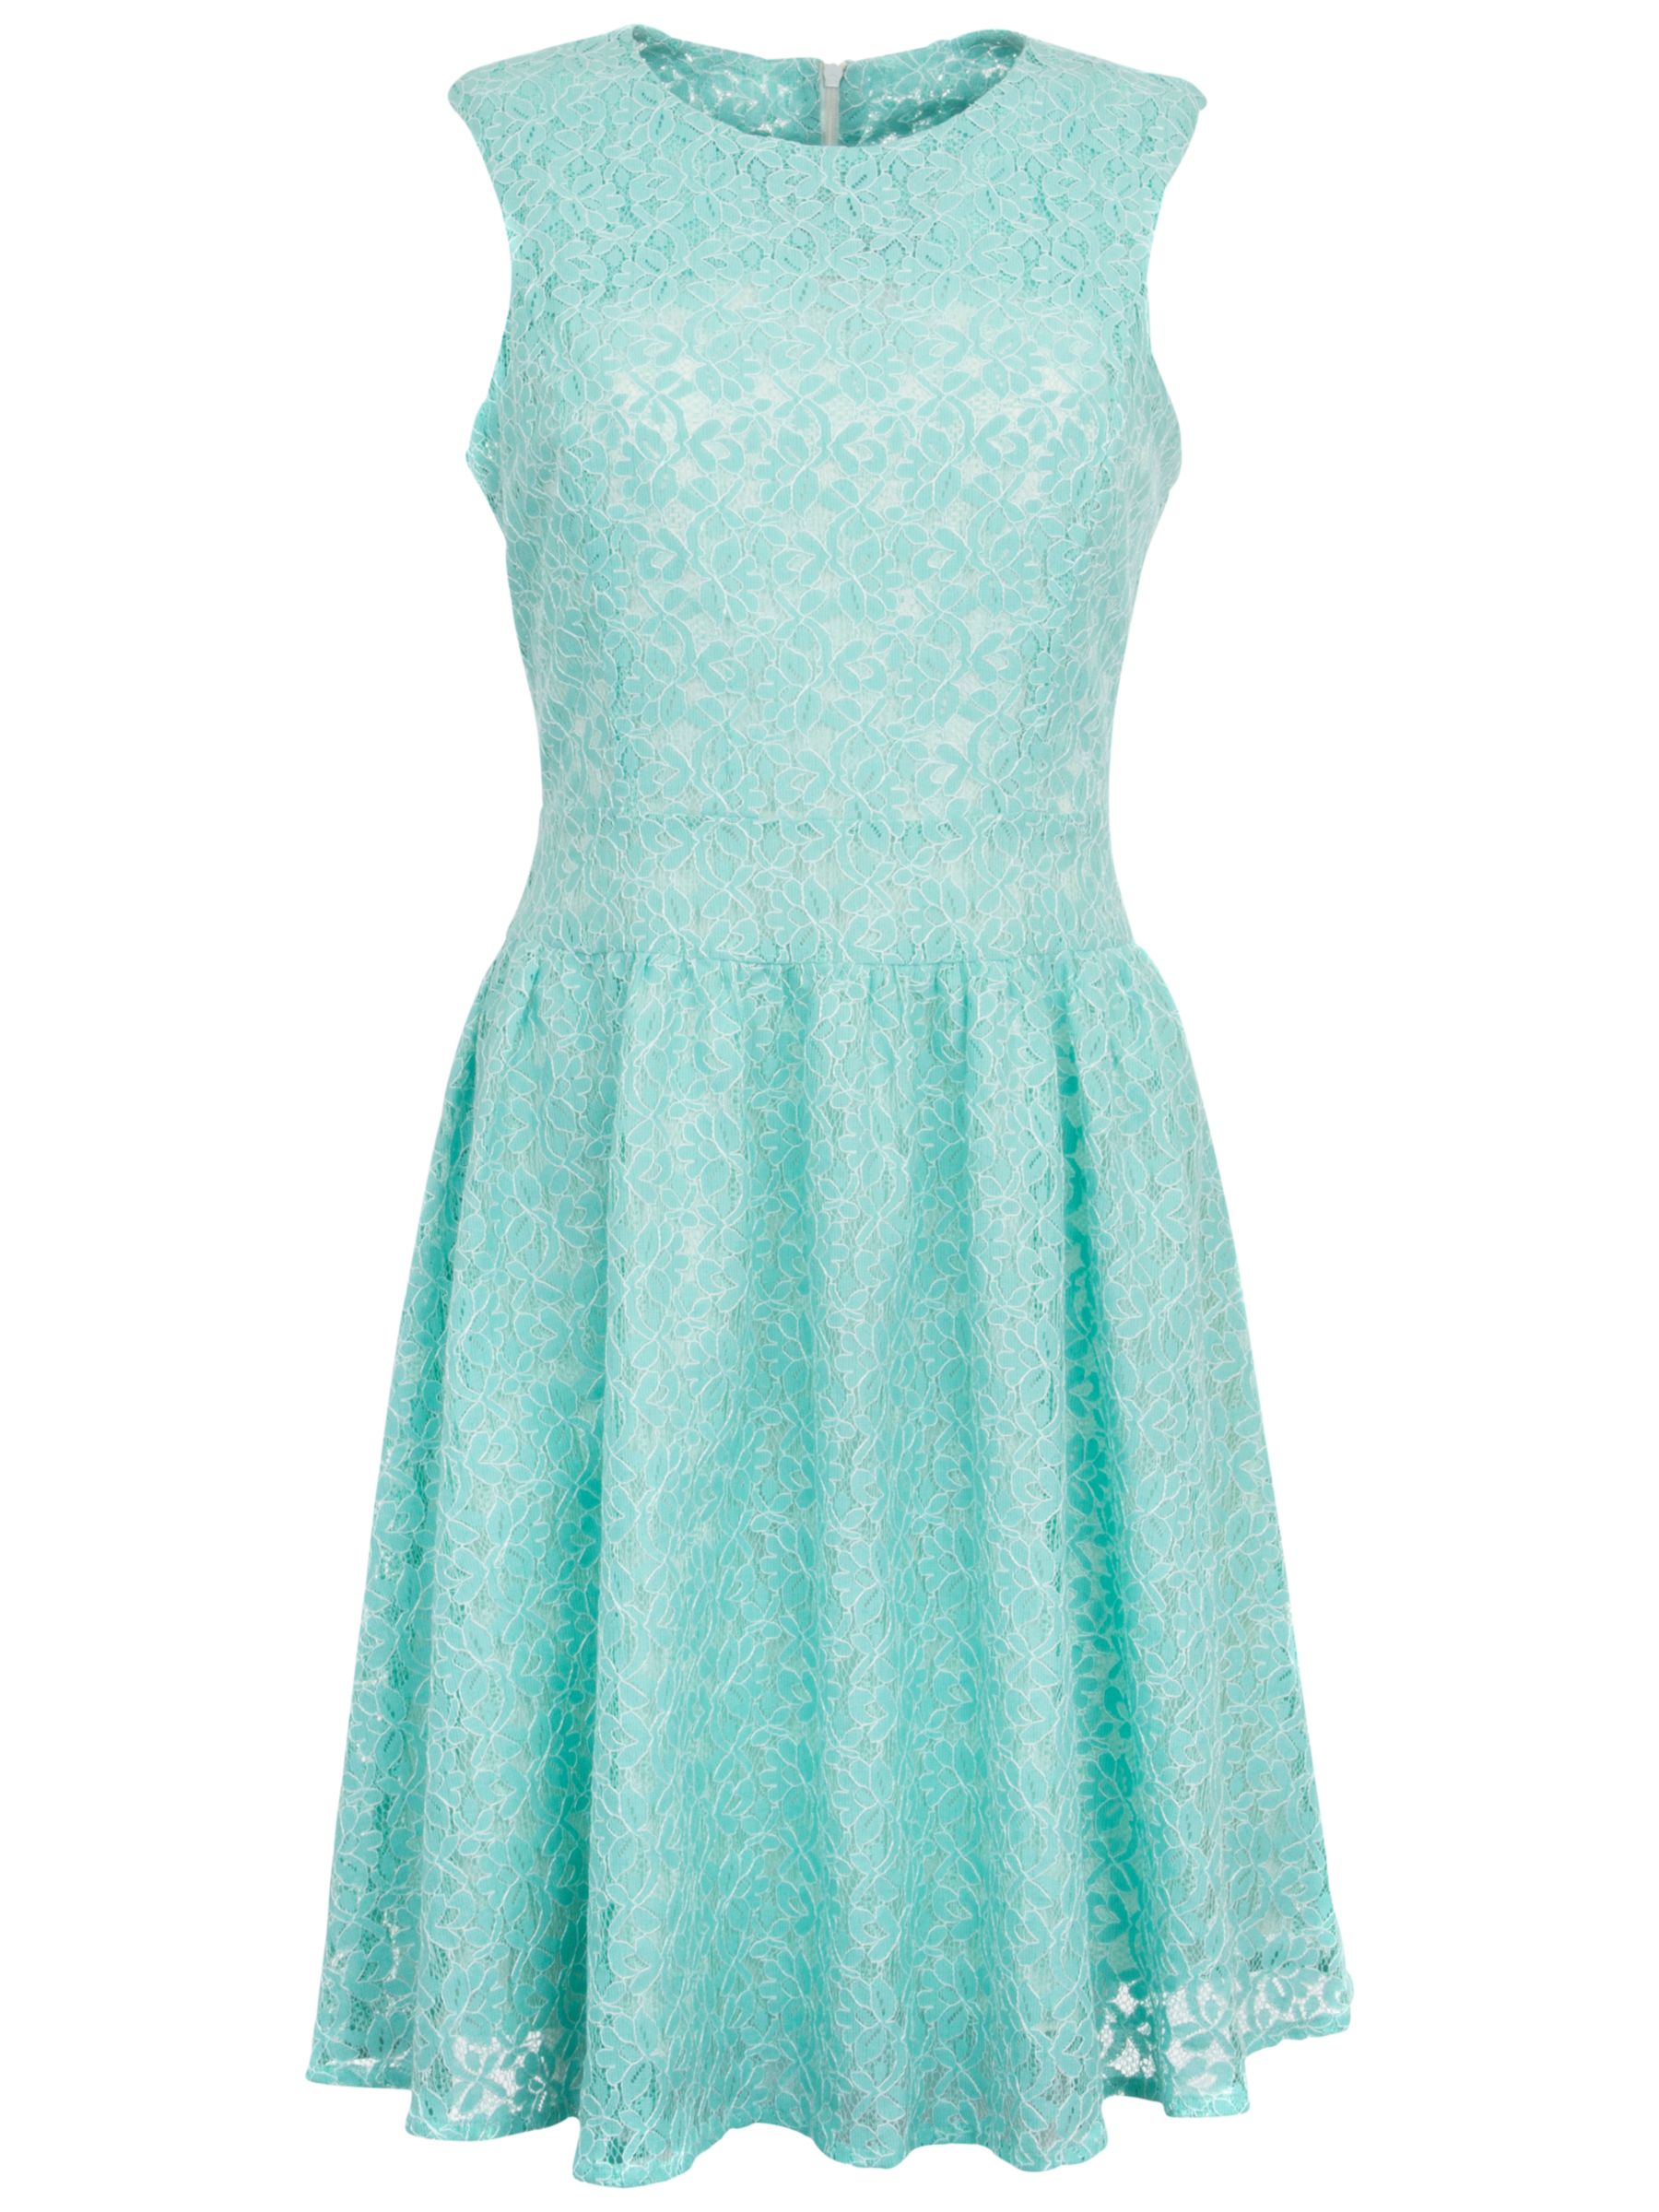 Wolf & Whistle Lace Prom Dress, Blue at John Lewis & Partners